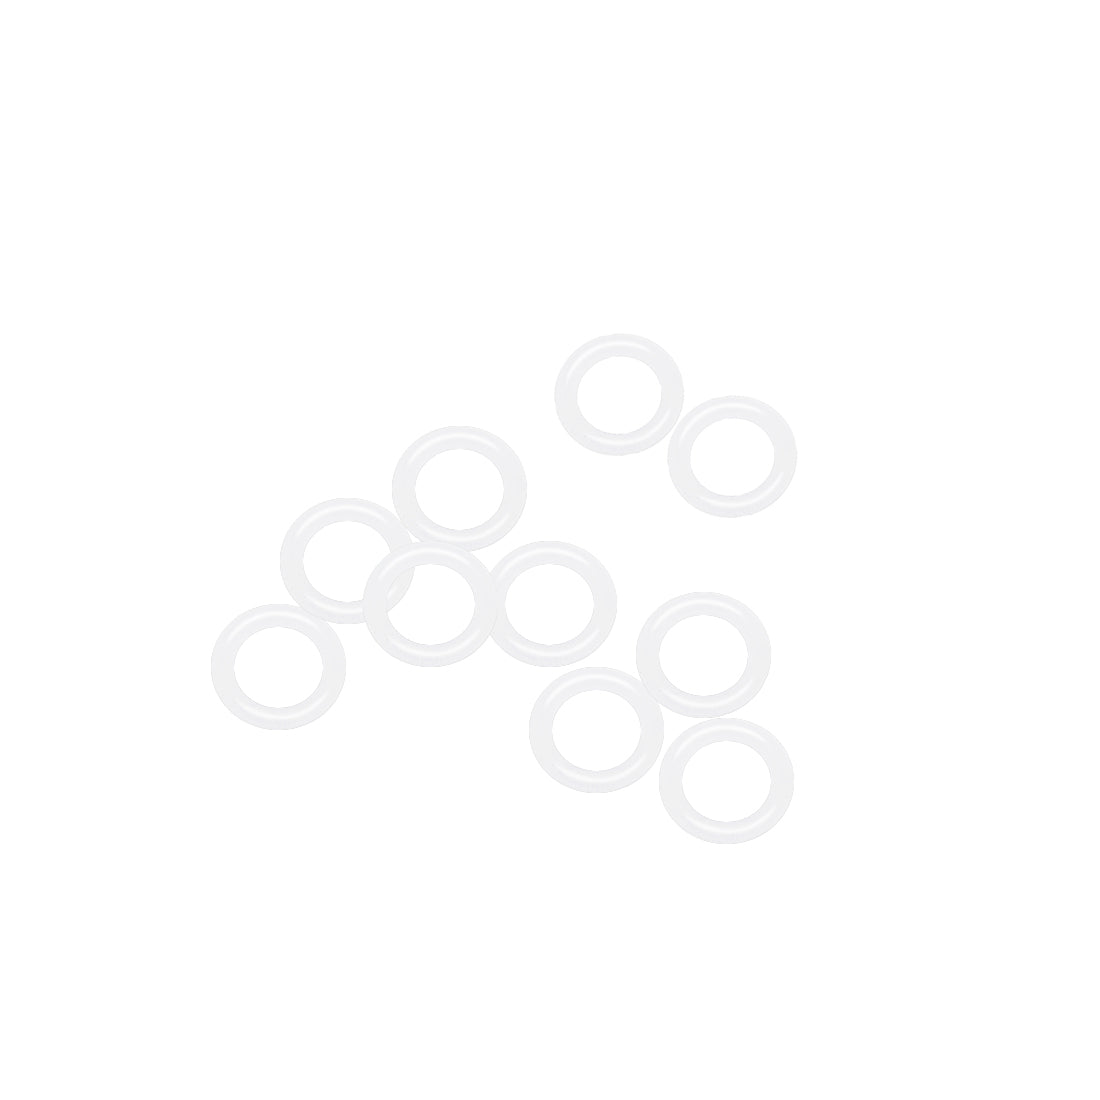 uxcell Uxcell Silicone O-Rings 14mm OD, 9.2mm ID, 2.4mm Width, Seal Gasket White 10Pcs